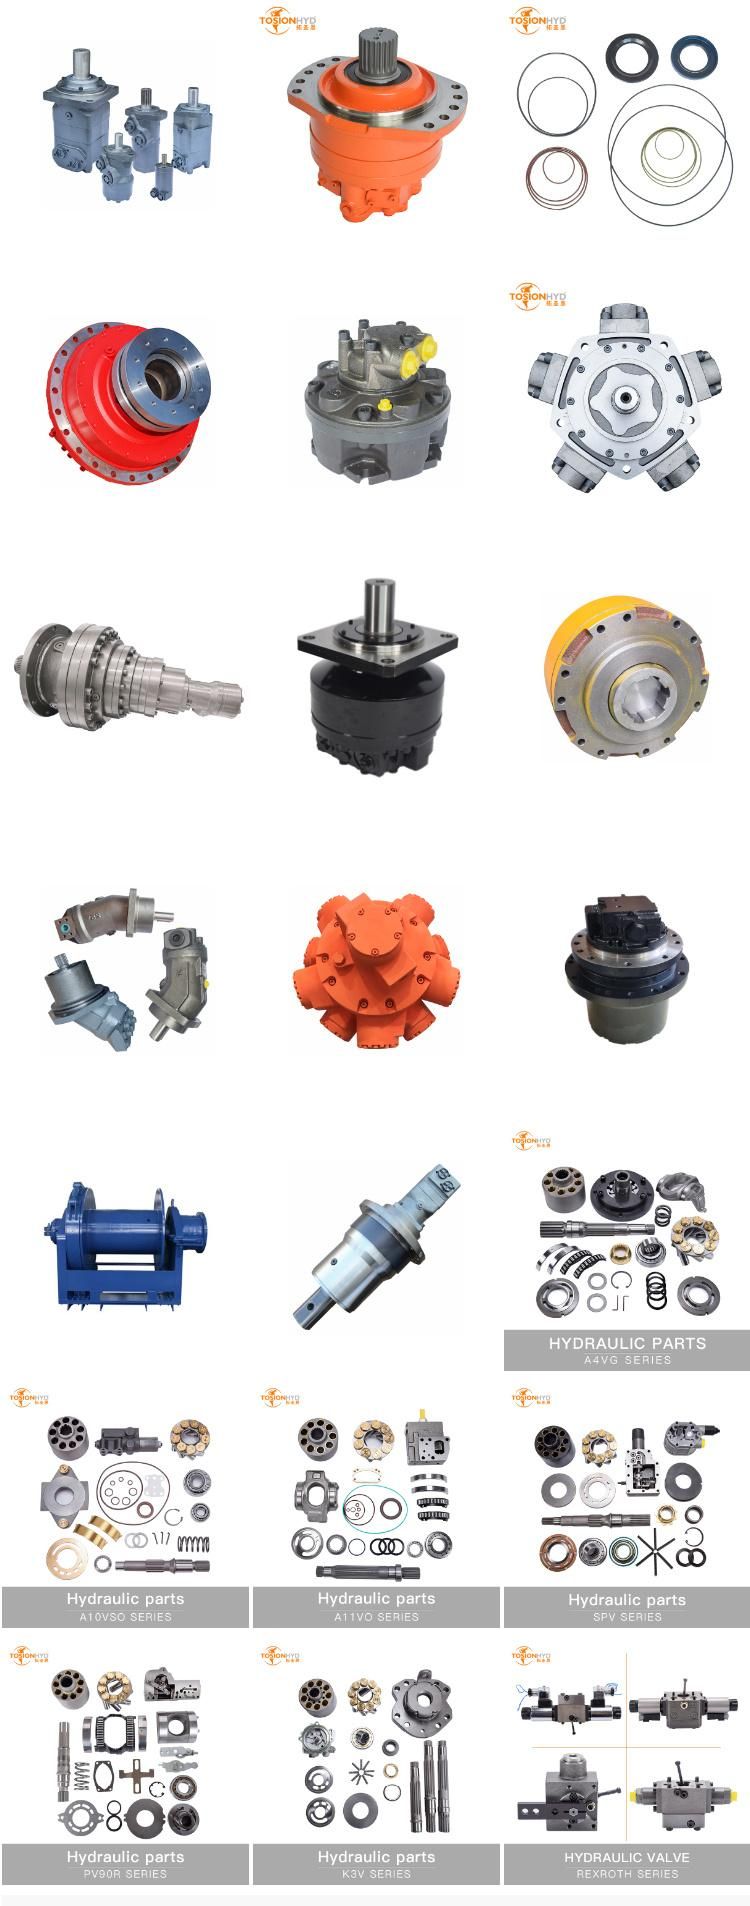 A2FM 23 Hydraulic Motor Parts with Rexroth Spare Repair Kits